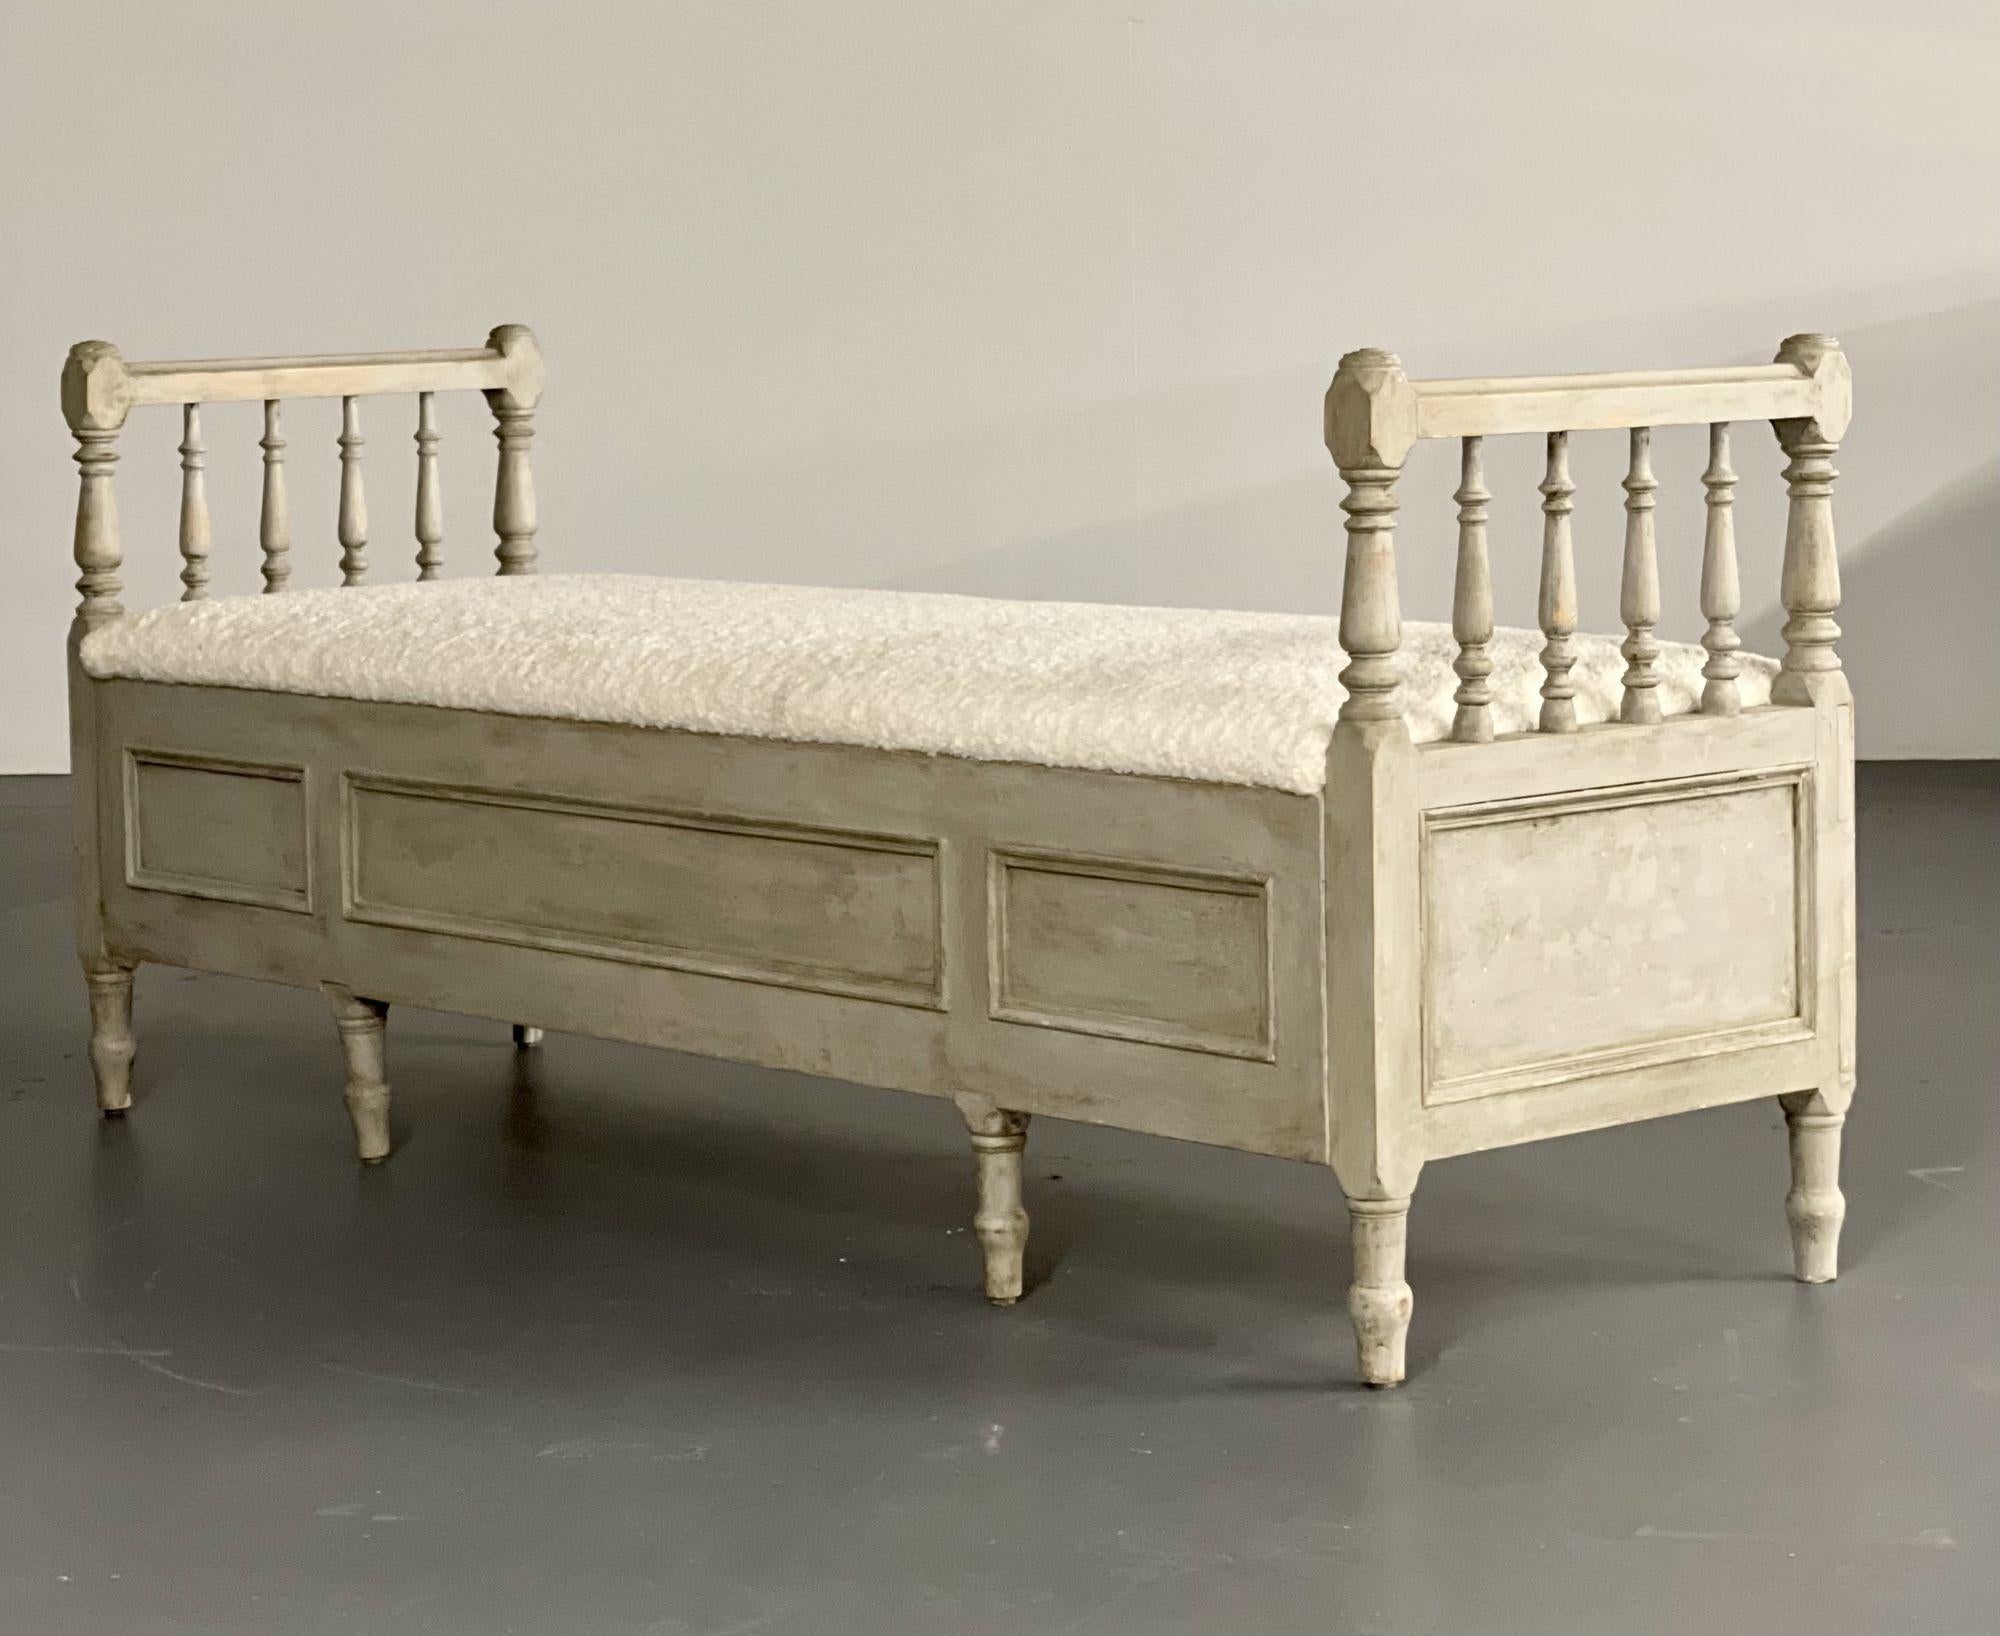 Gustavian paint decorated storage bench, new wool shearling, Sweden 19th Century
 
Wonderful gustavian bench or daybed having a brand new white wool shearling/sheepskin upholstery and original distressed paint decorated frame. The center seating